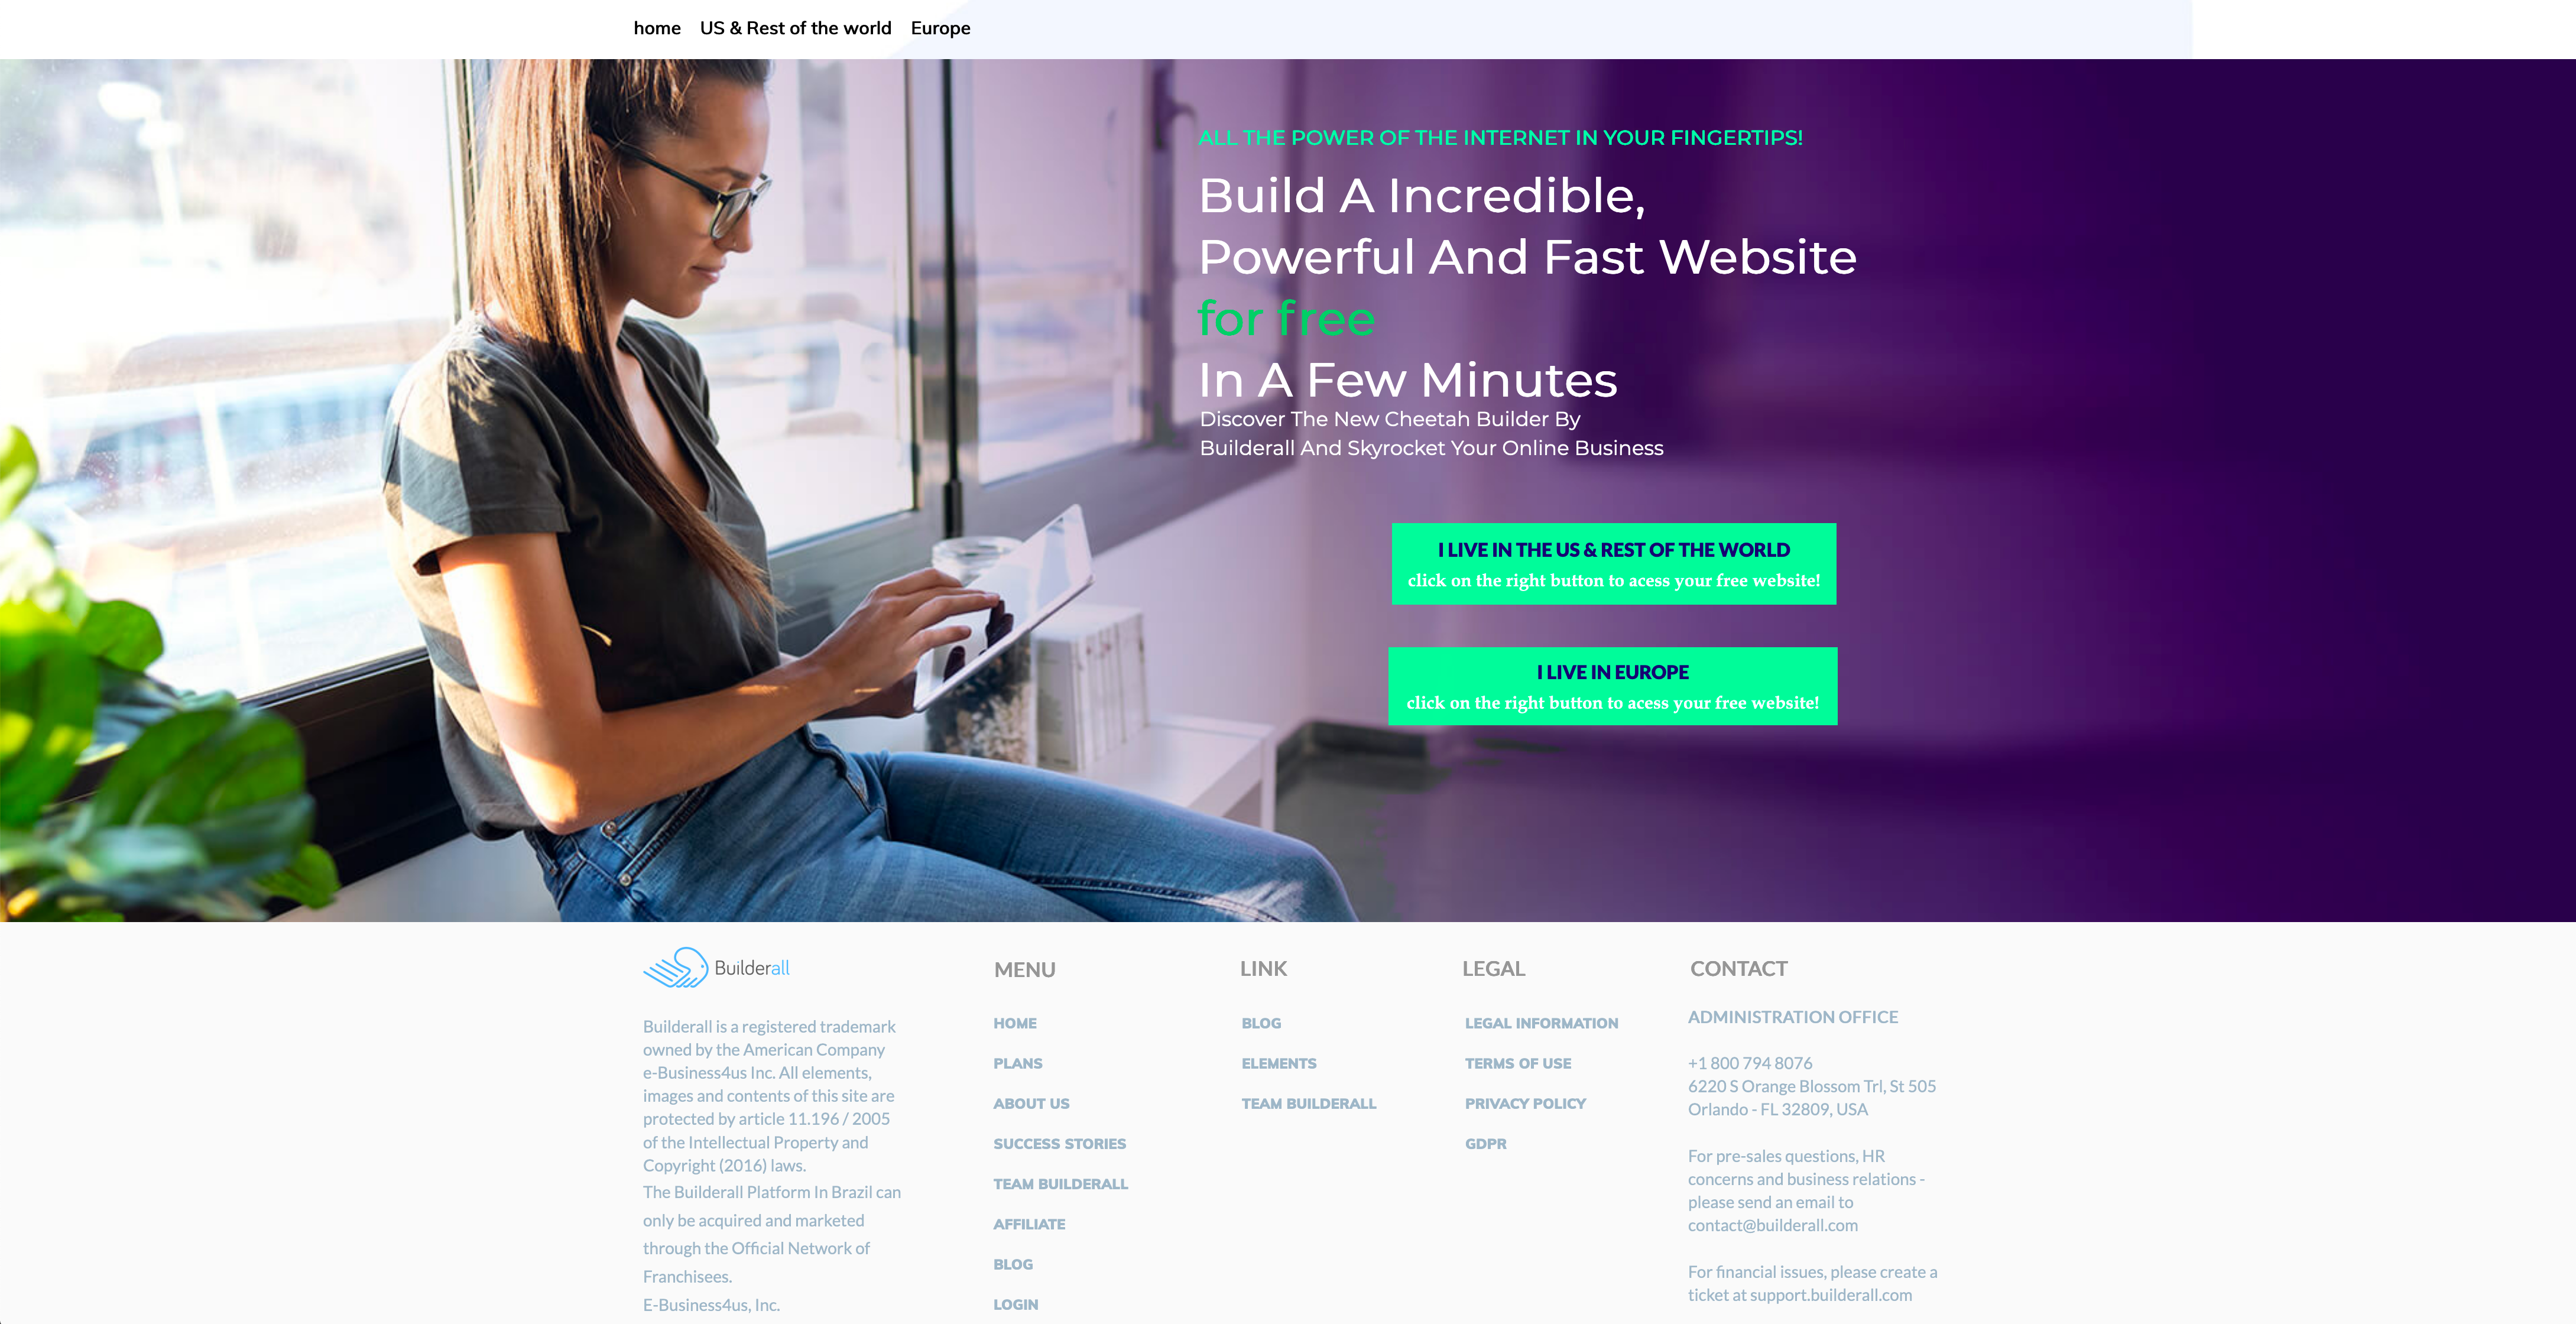 How to Build A Incredible, Powerful And Fast Website for Free In A Few Minutes in 2020 with Builderall-for-free.com